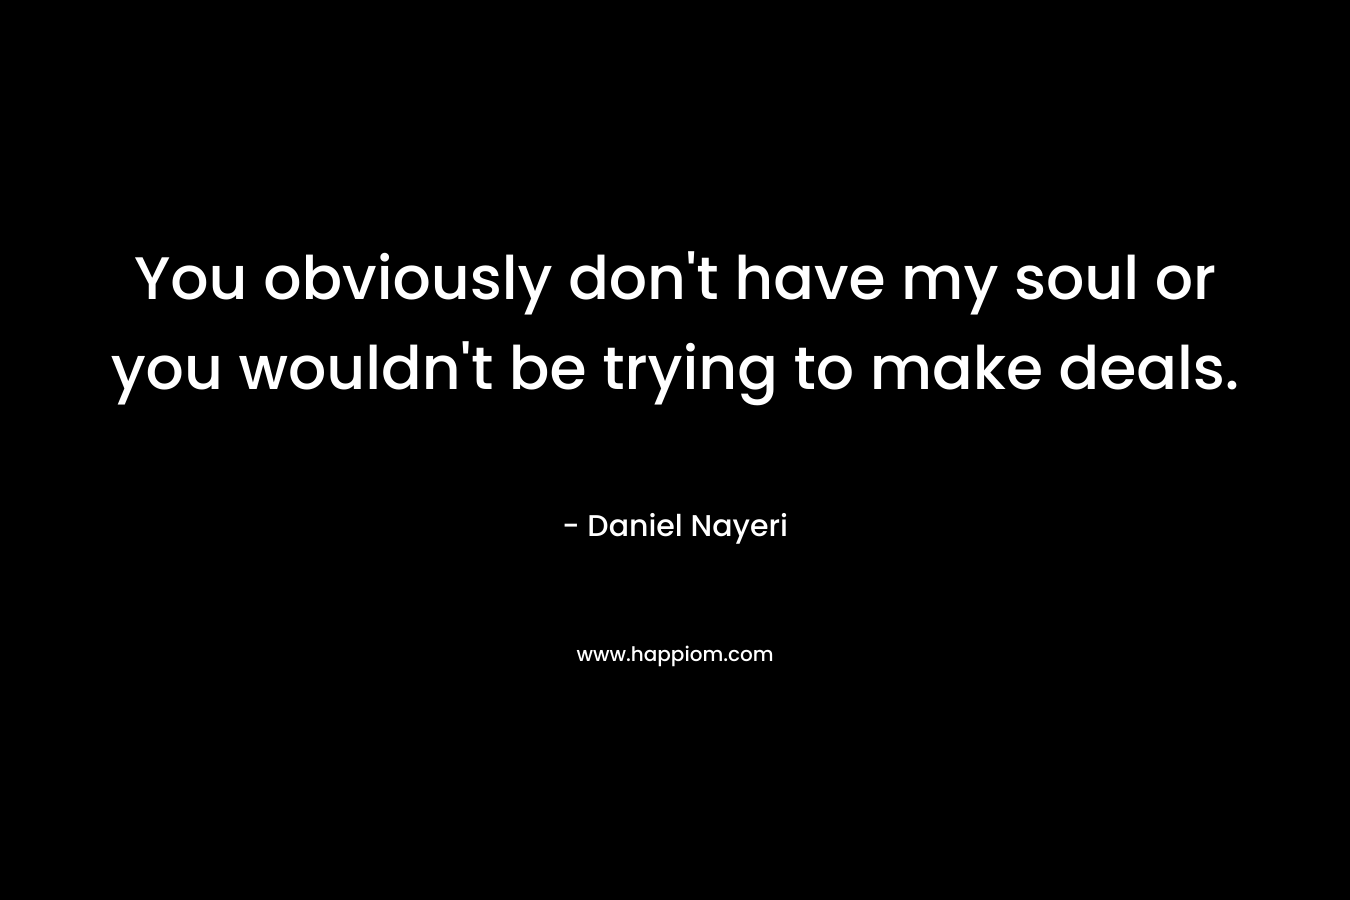 You obviously don’t have my soul or you wouldn’t be trying to make deals. – Daniel Nayeri